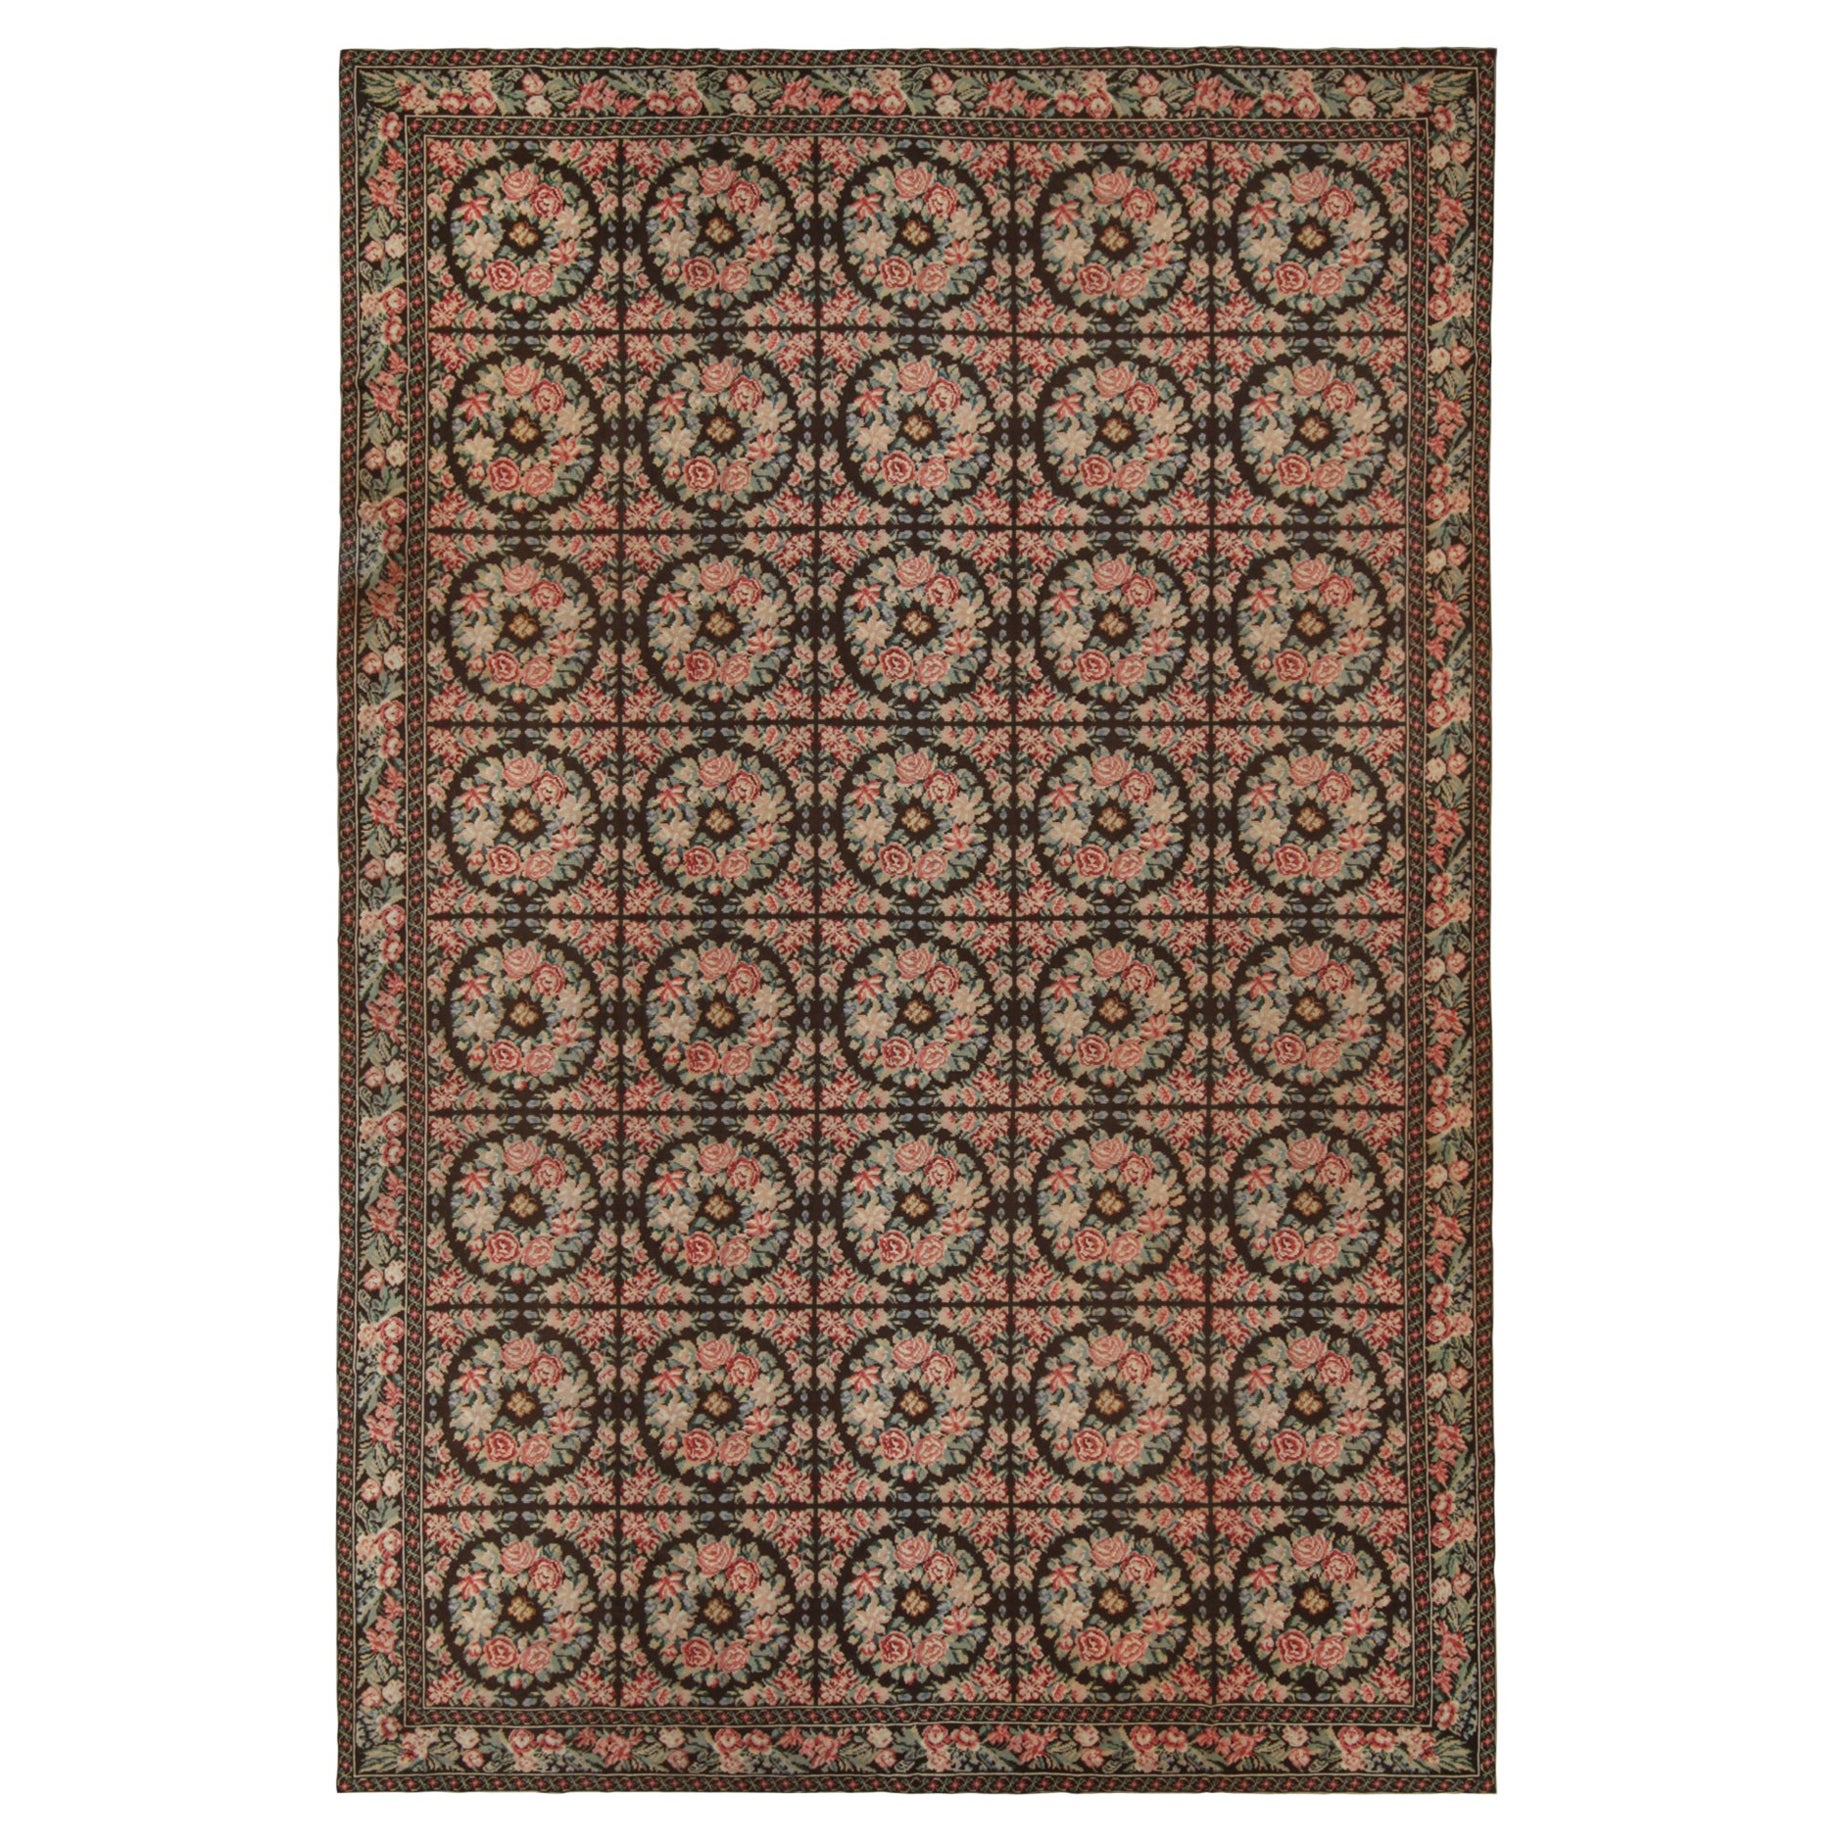 Antique Needlepoint rug in Brown with Botanical Florals, from Rug & Kilim